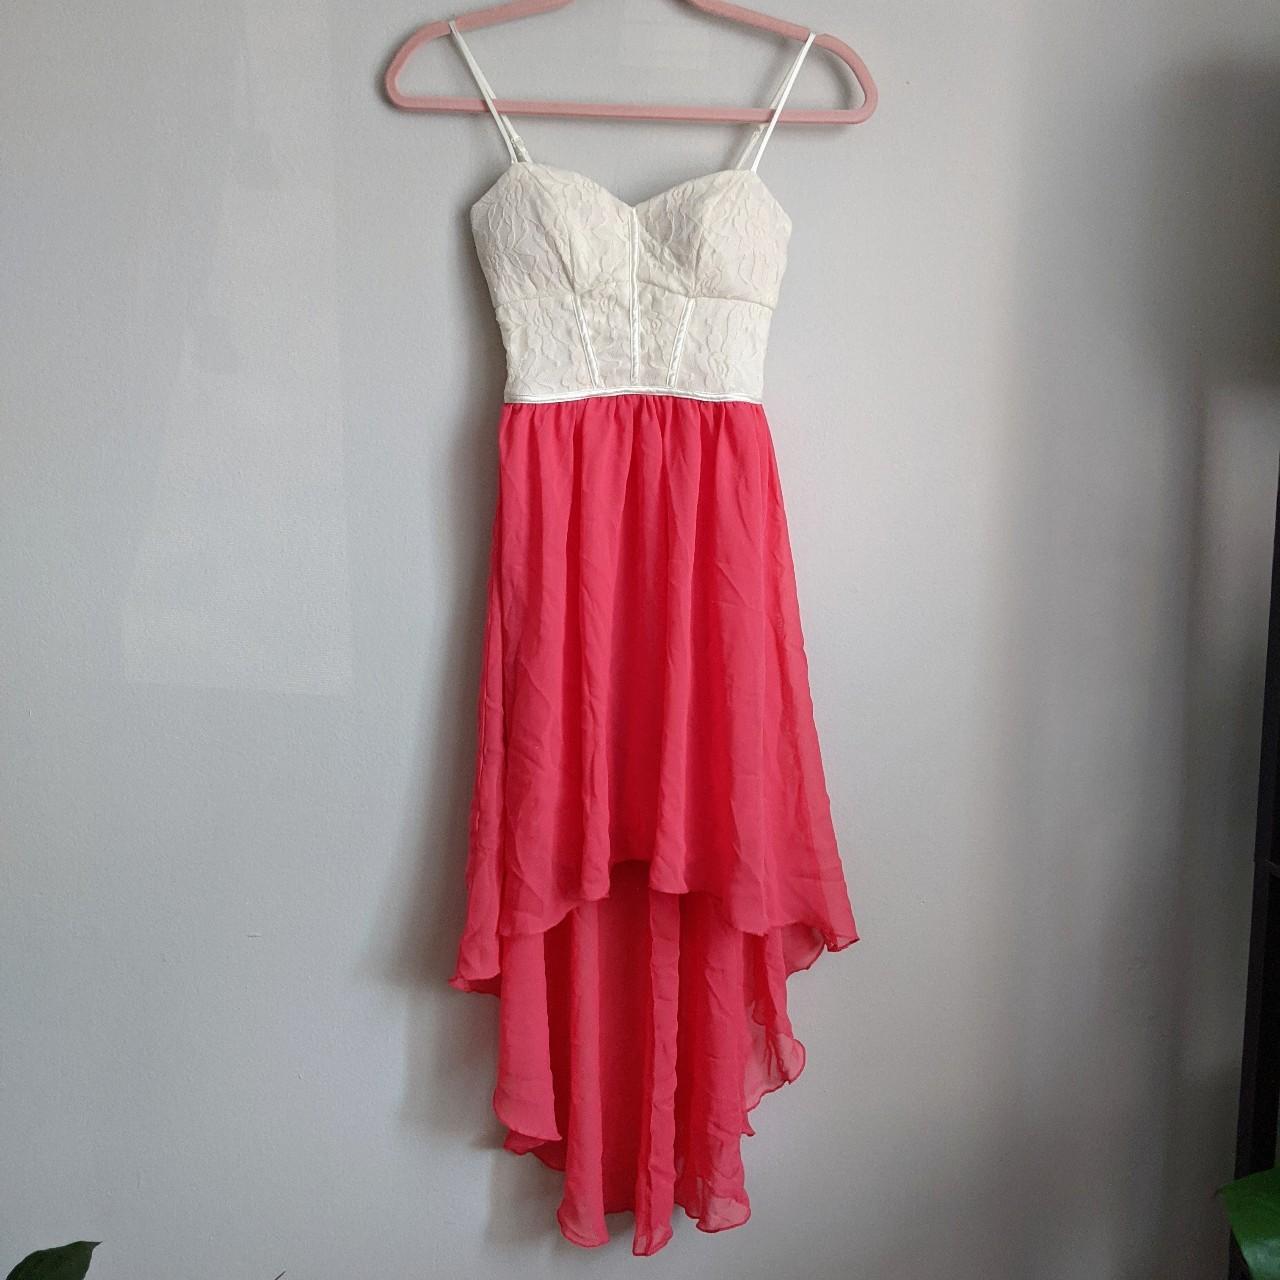 Delia's Women's White and Pink Dress